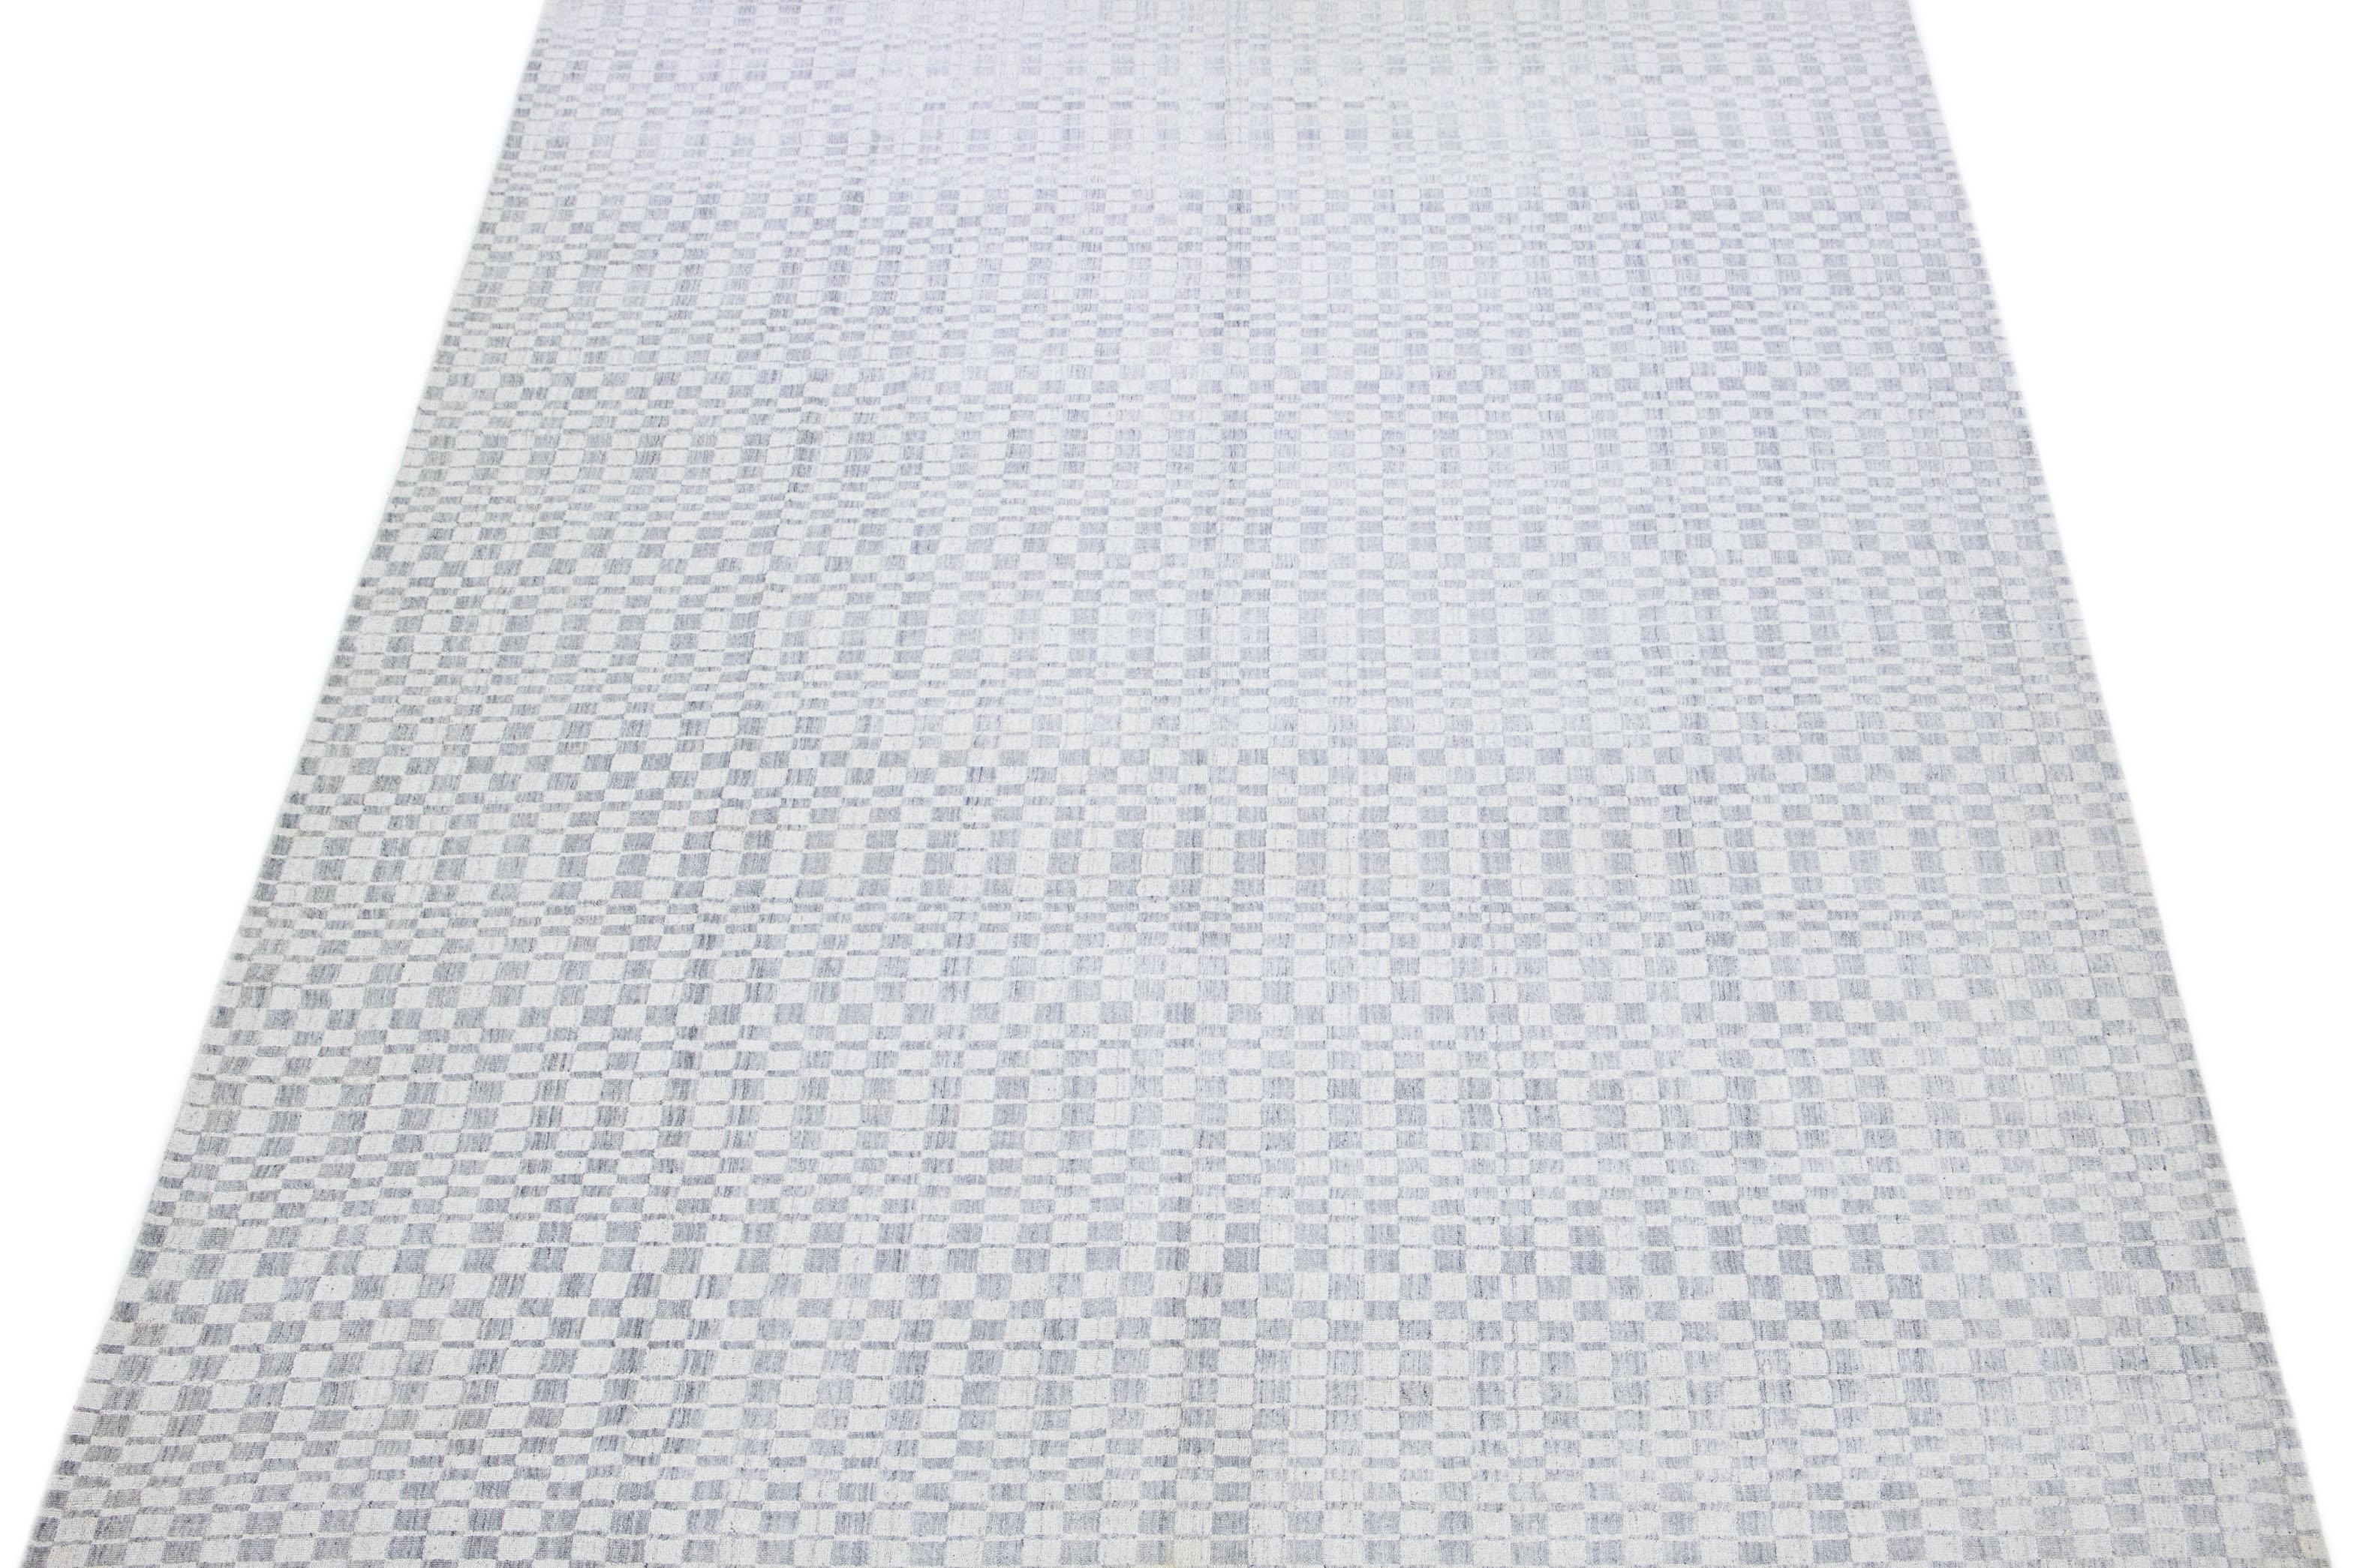 Beautiful modern wool & Silk rug with a grey field featuring a gorgeous seamless geometric design.

This rug measures 9'11